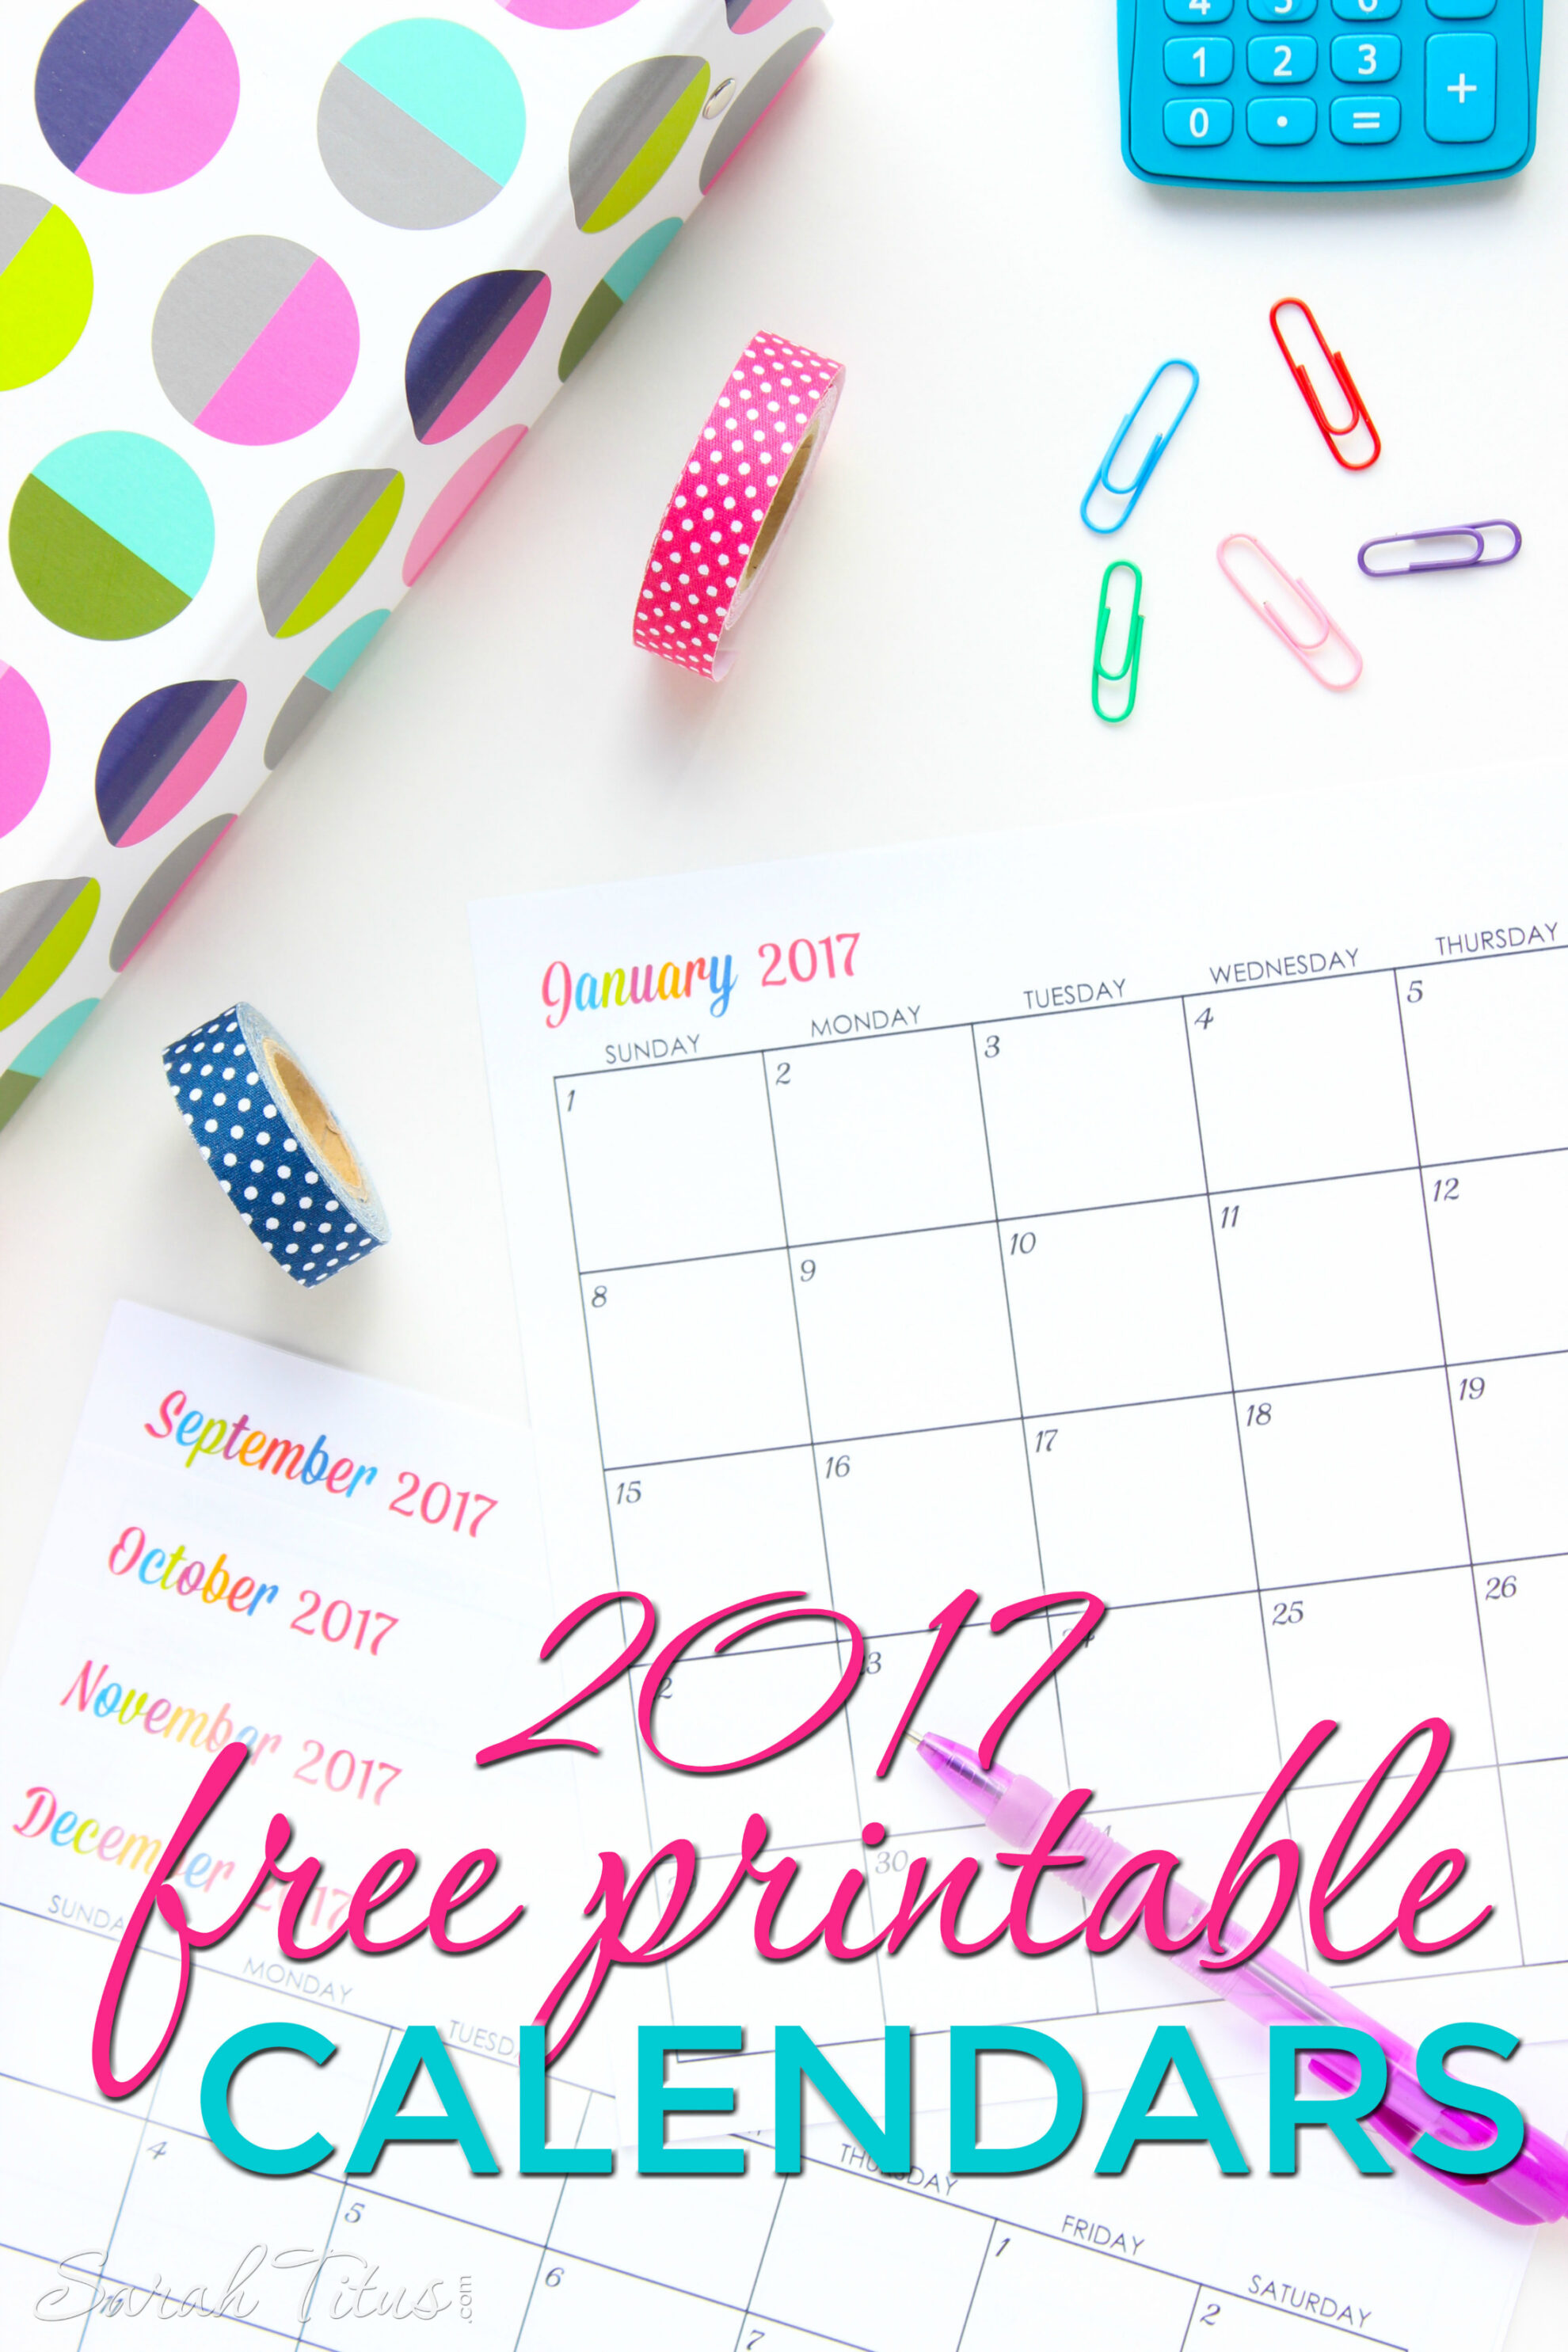 Free Printable 2017 Calendars - Completely editable online!!! Use them for menu planning, homeschooling, blogging, or just to organize your life.